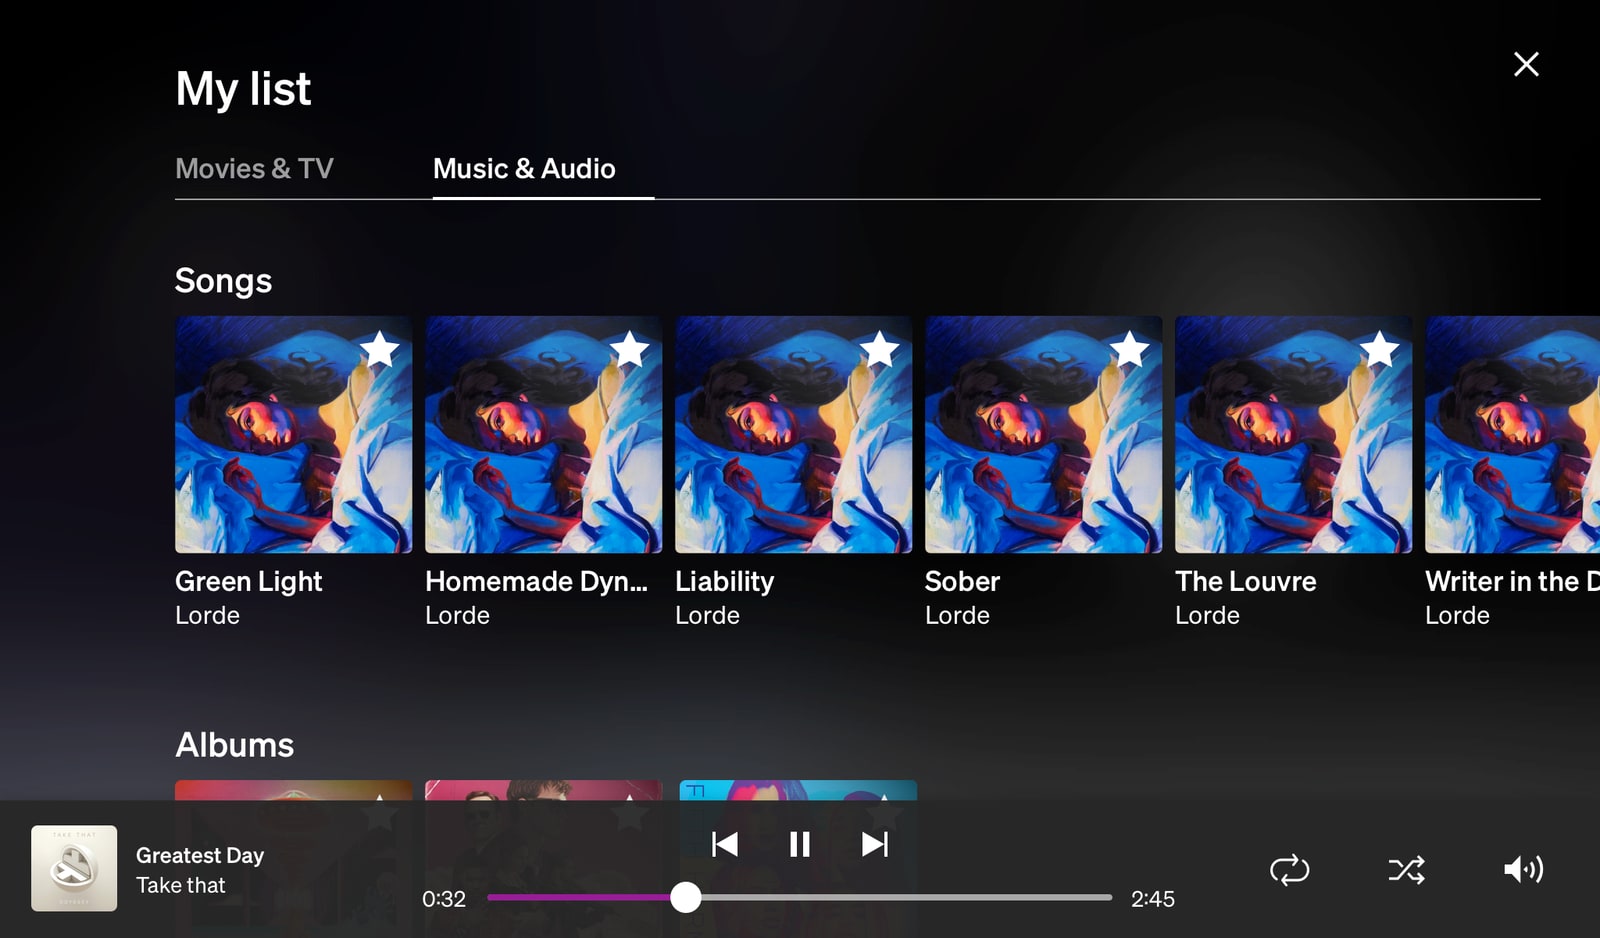 Favourites showing Music & Audio choices and the media player controls visibly playing a song.